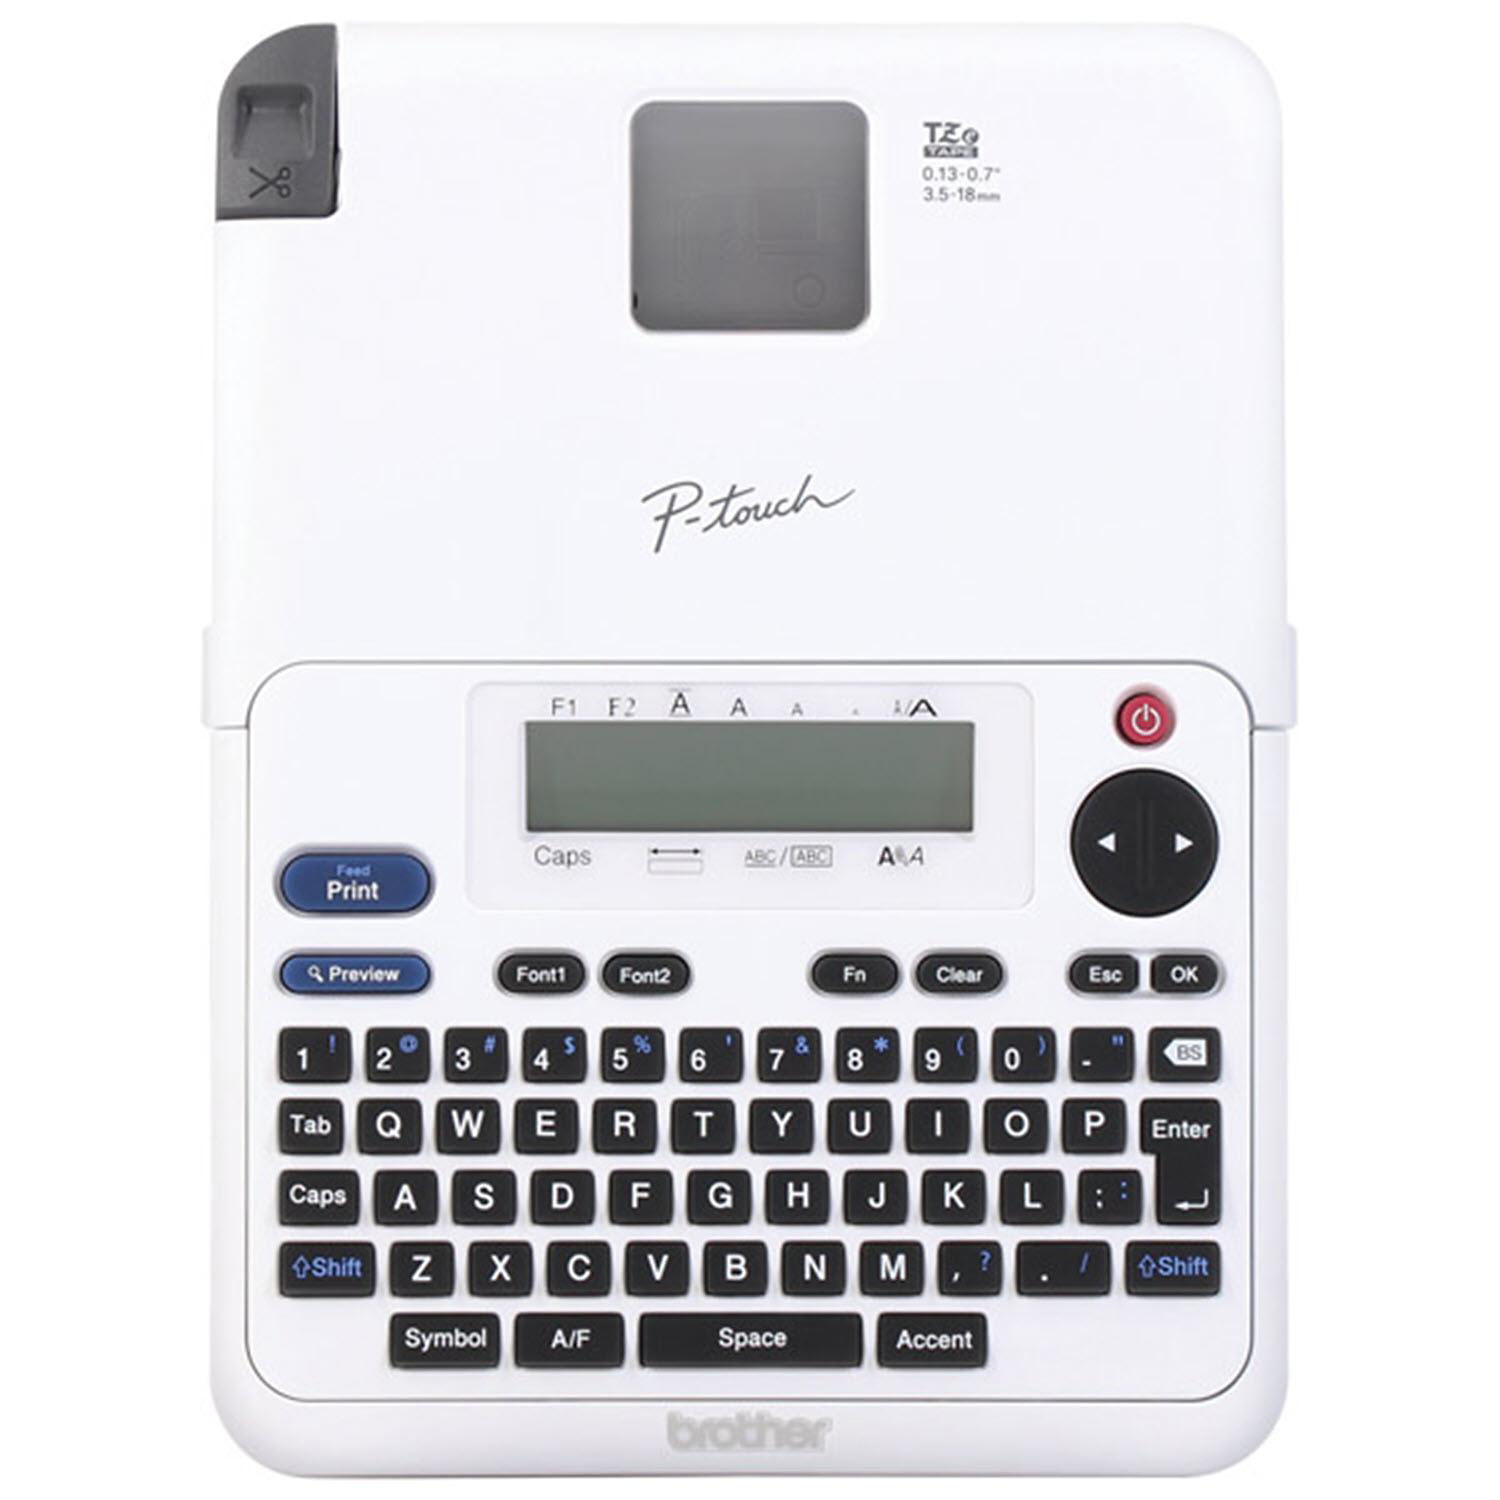 Brother PTD210 P-Touch Easy Compact Label Maker White for sale online 